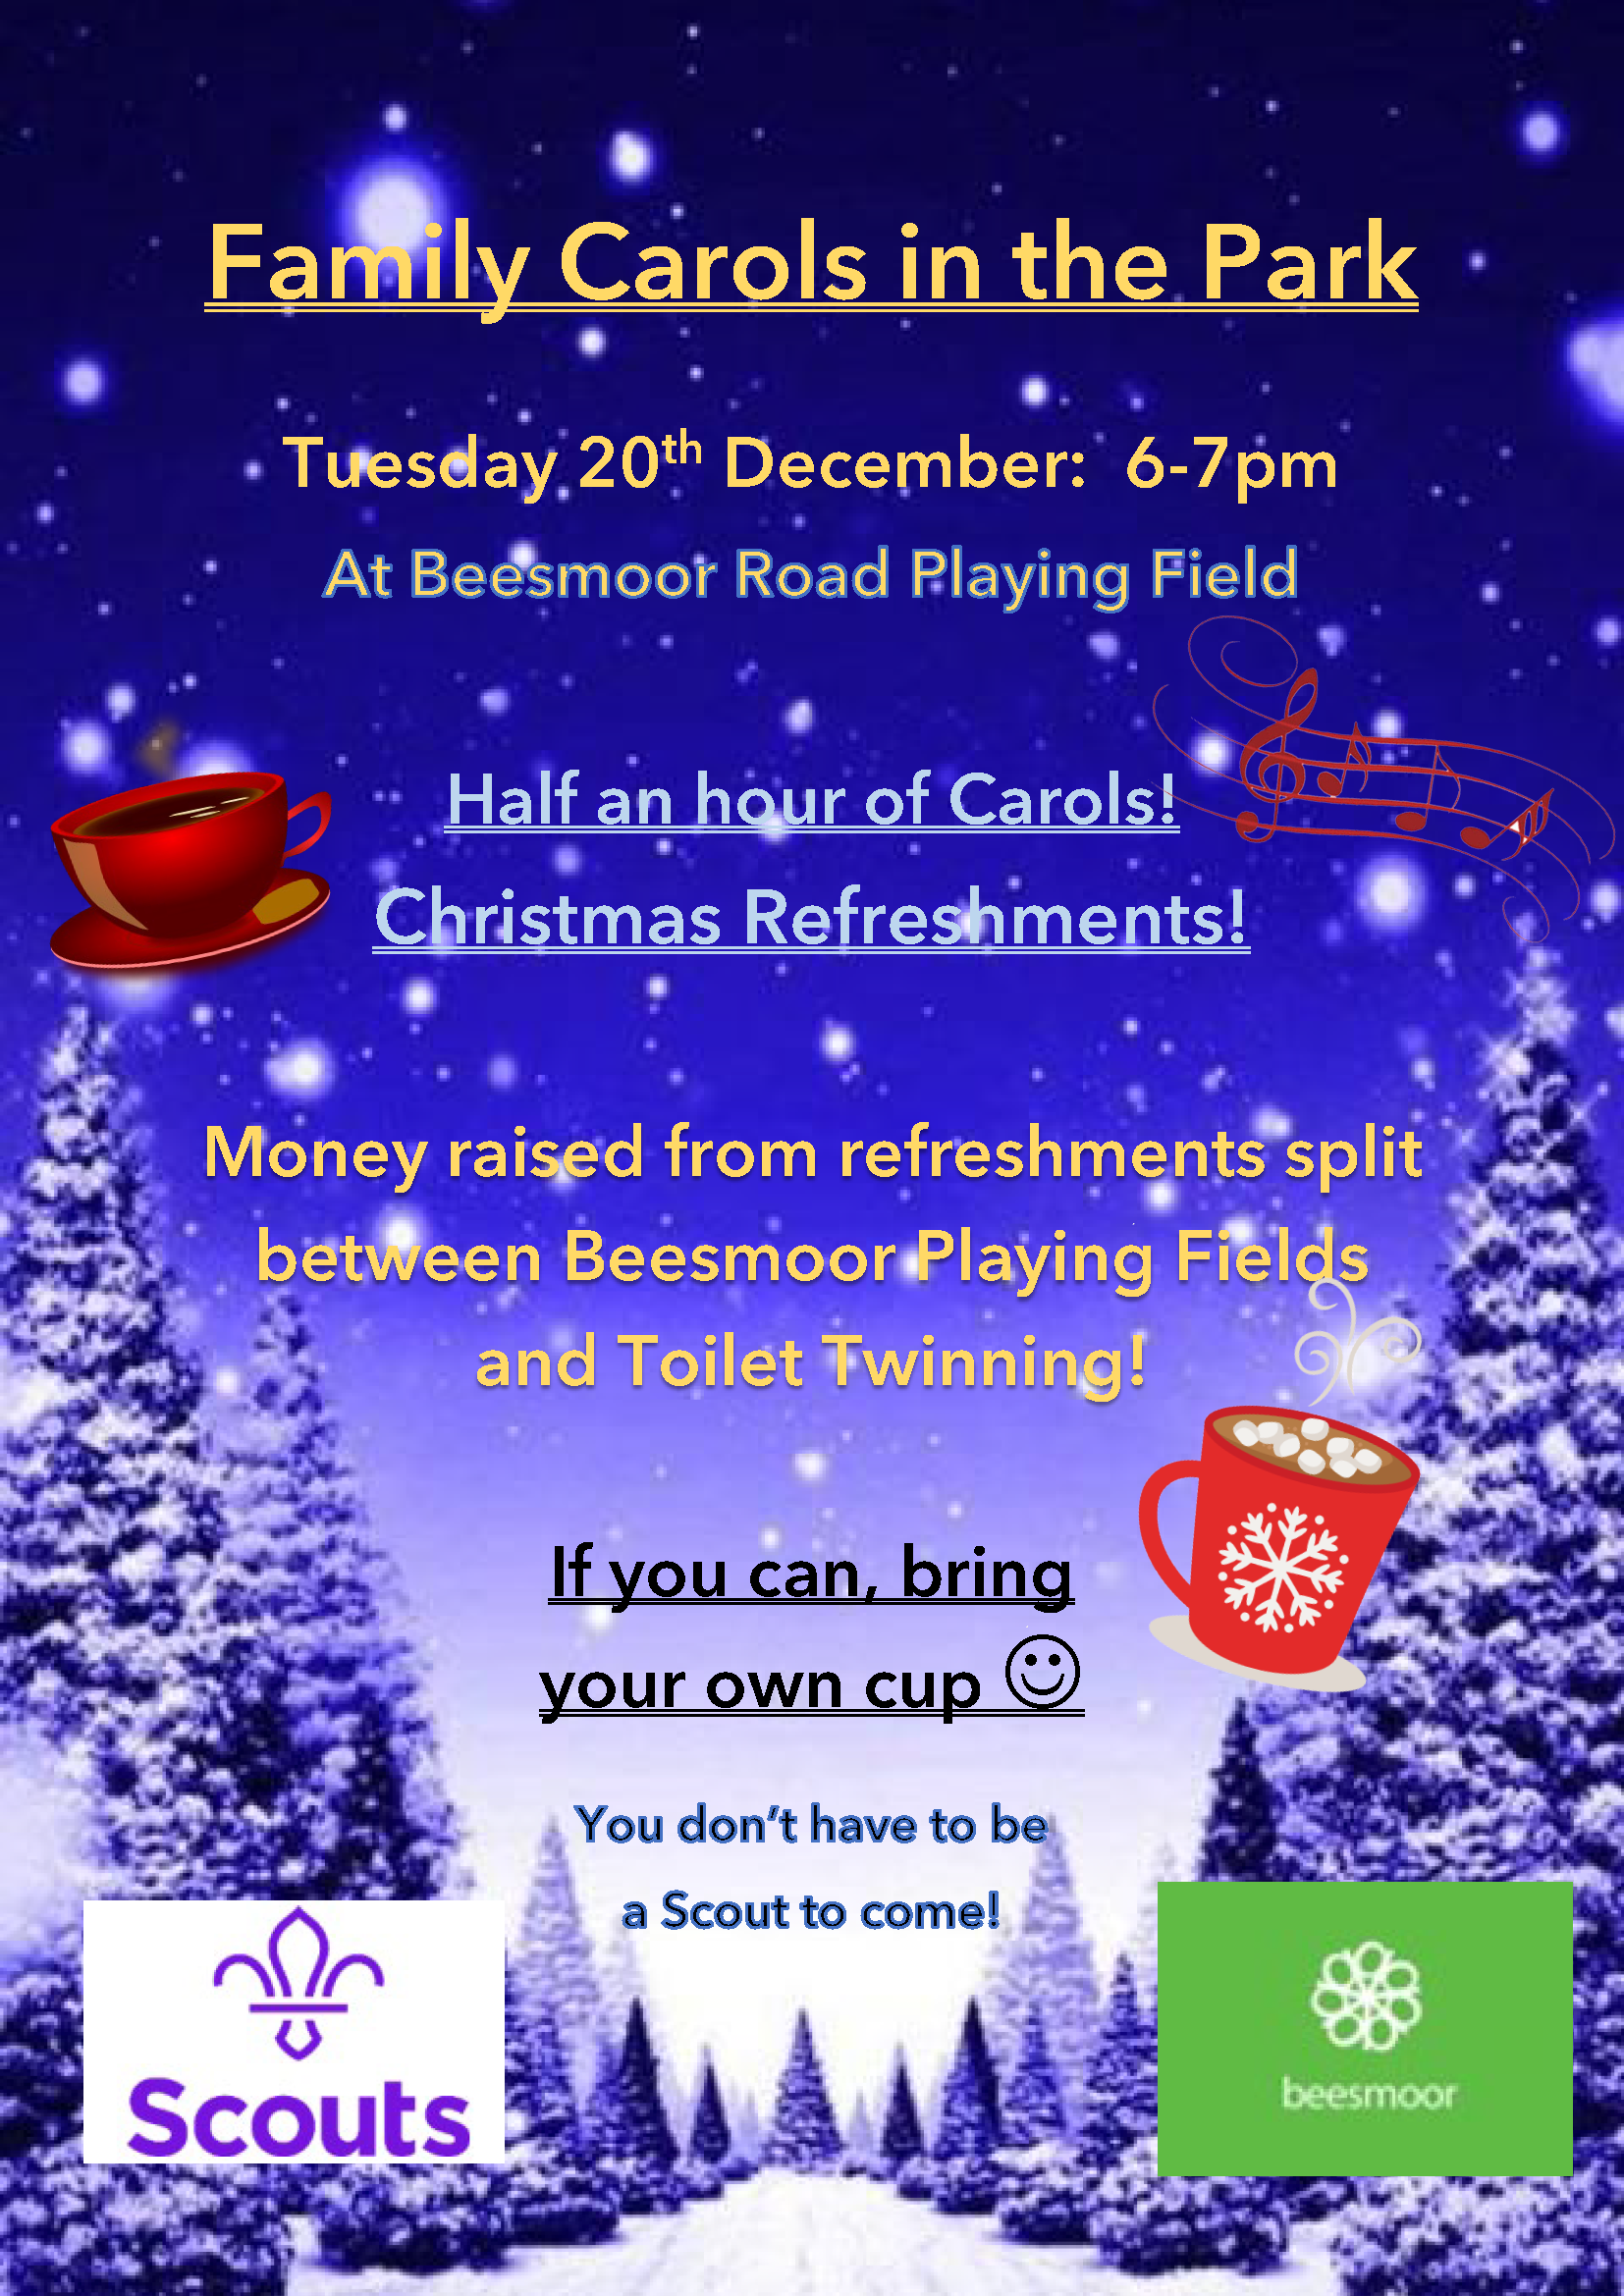 Family Carols in the Park. Tuesday 20th December:  6-7pm At Beesmoor Road Playing Field. Half an hour of Carols! Christmas Refreshments!  Money raised from refreshments split between Beesmoor Playing Fields and Toilet Twinning!  If you can, bring your own cup. You don’t have to be  a Scout to come!